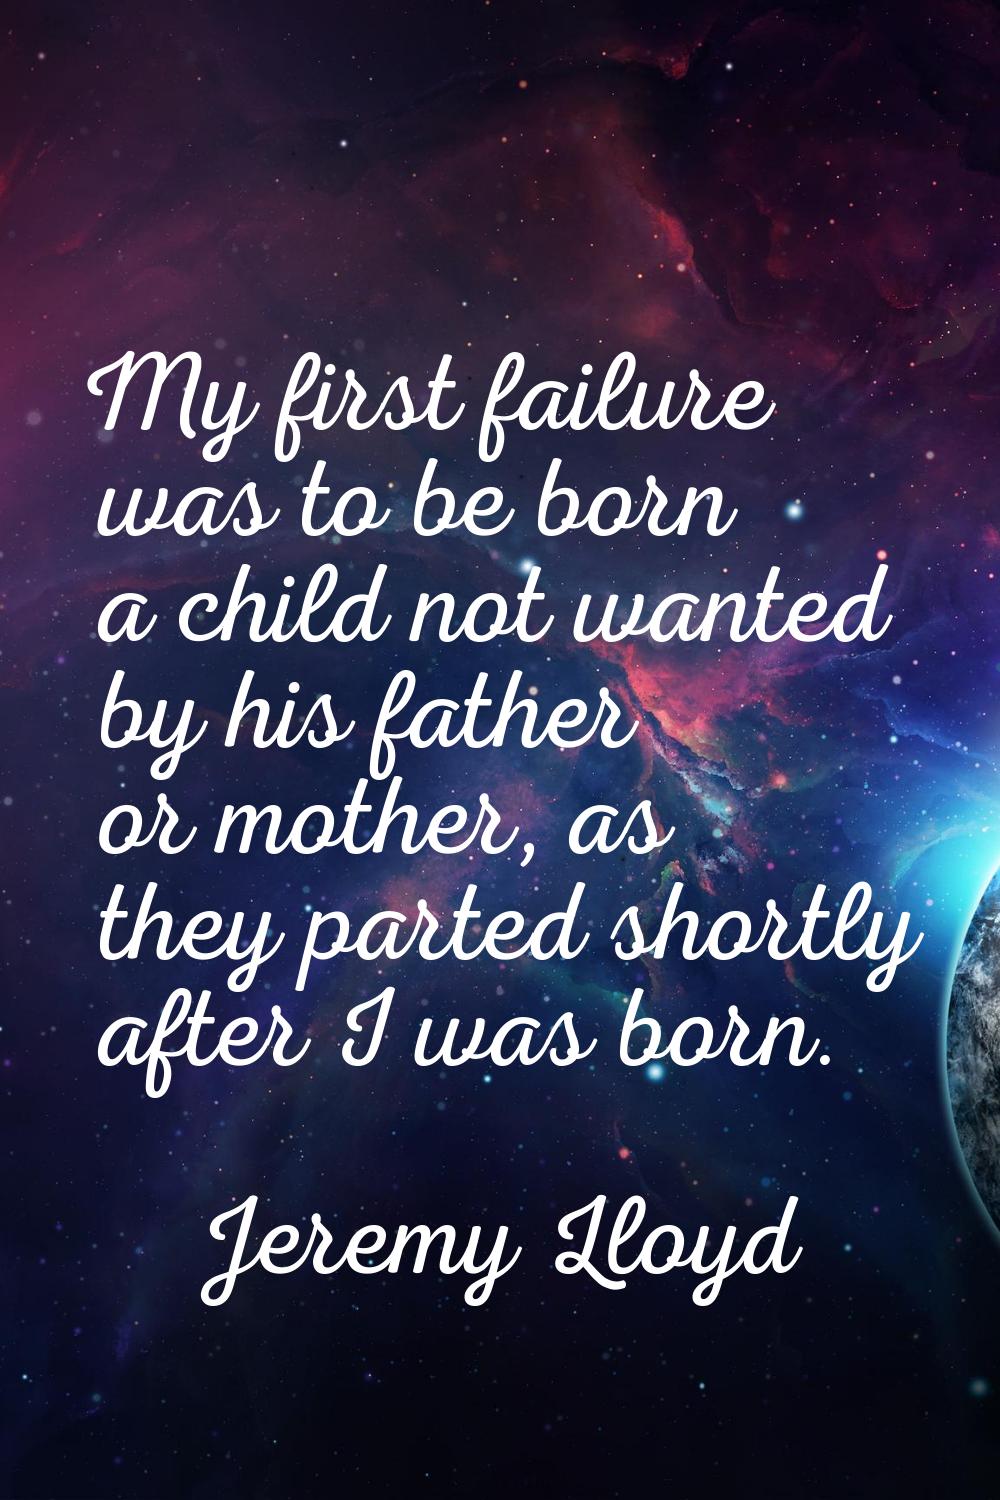 My first failure was to be born a child not wanted by his father or mother, as they parted shortly 